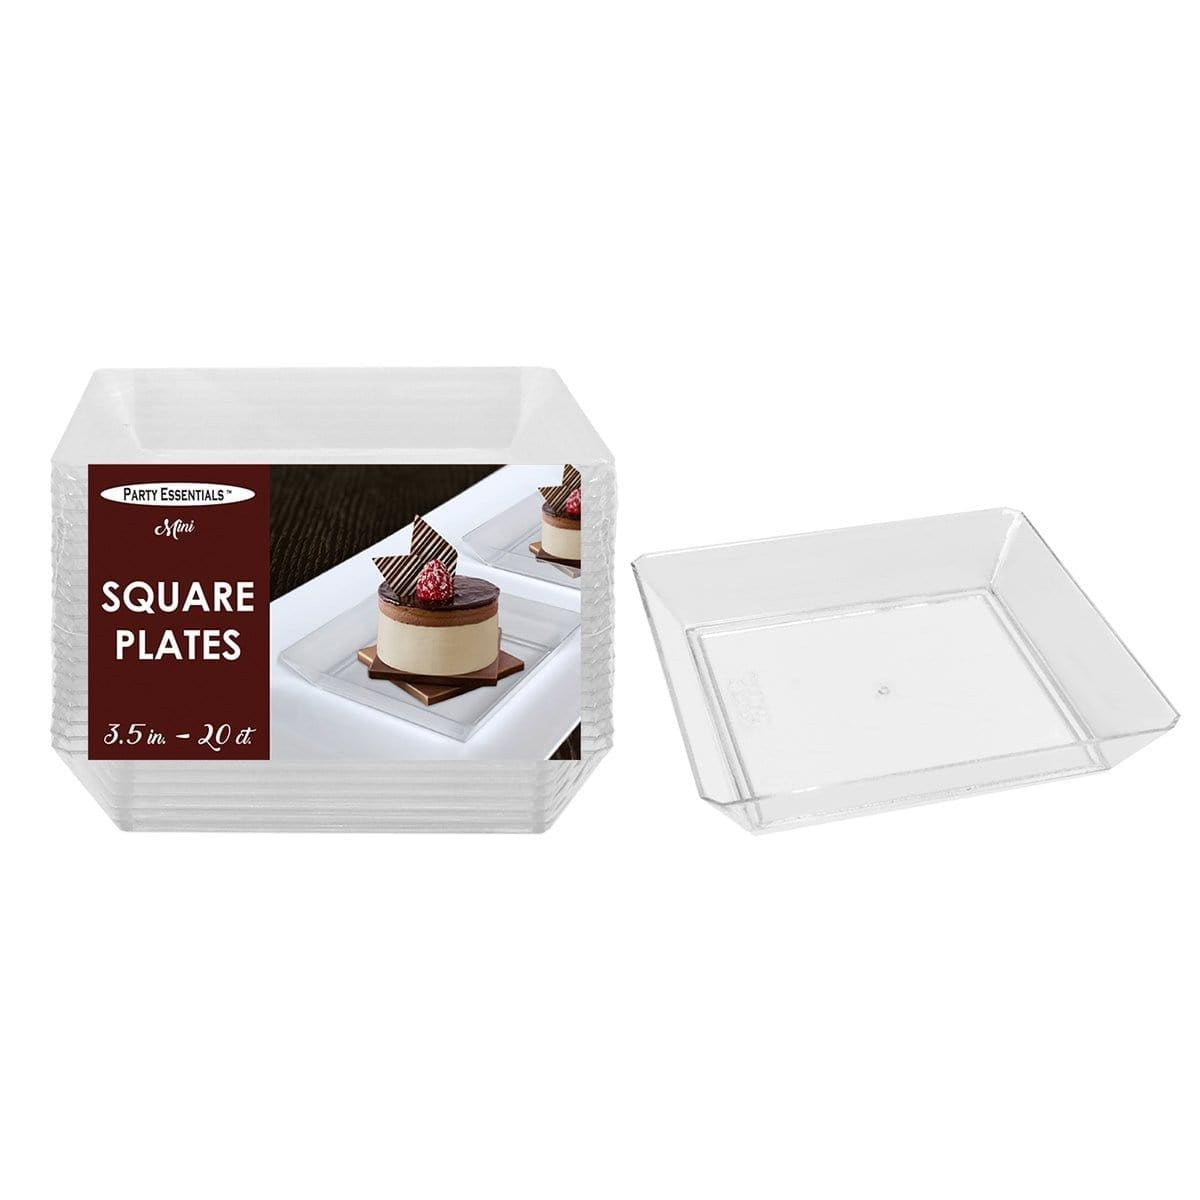 Buy Plasticware Square Dishes 3.5 in. 20 Count sold at Party Expert